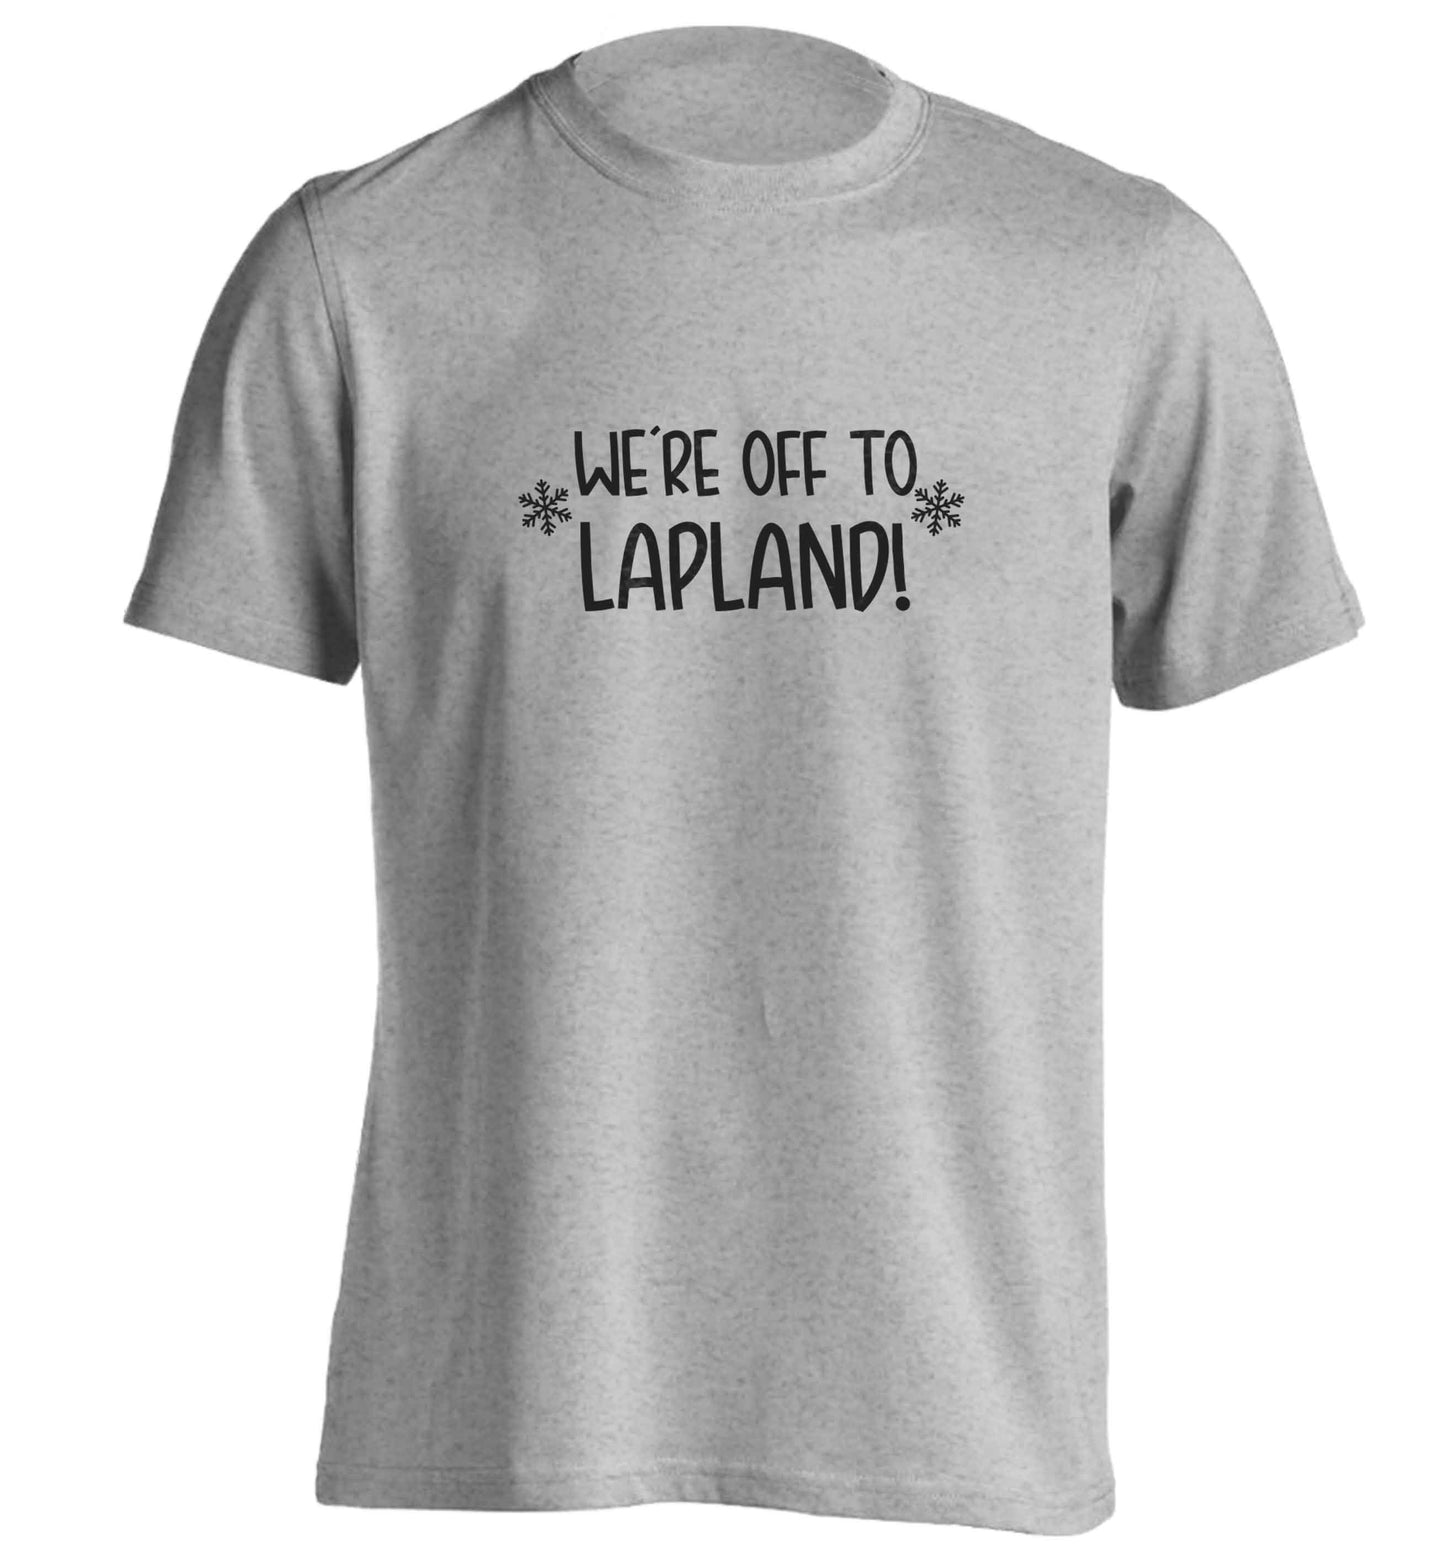 We're off to Lapland adults unisex grey Tshirt 2XL